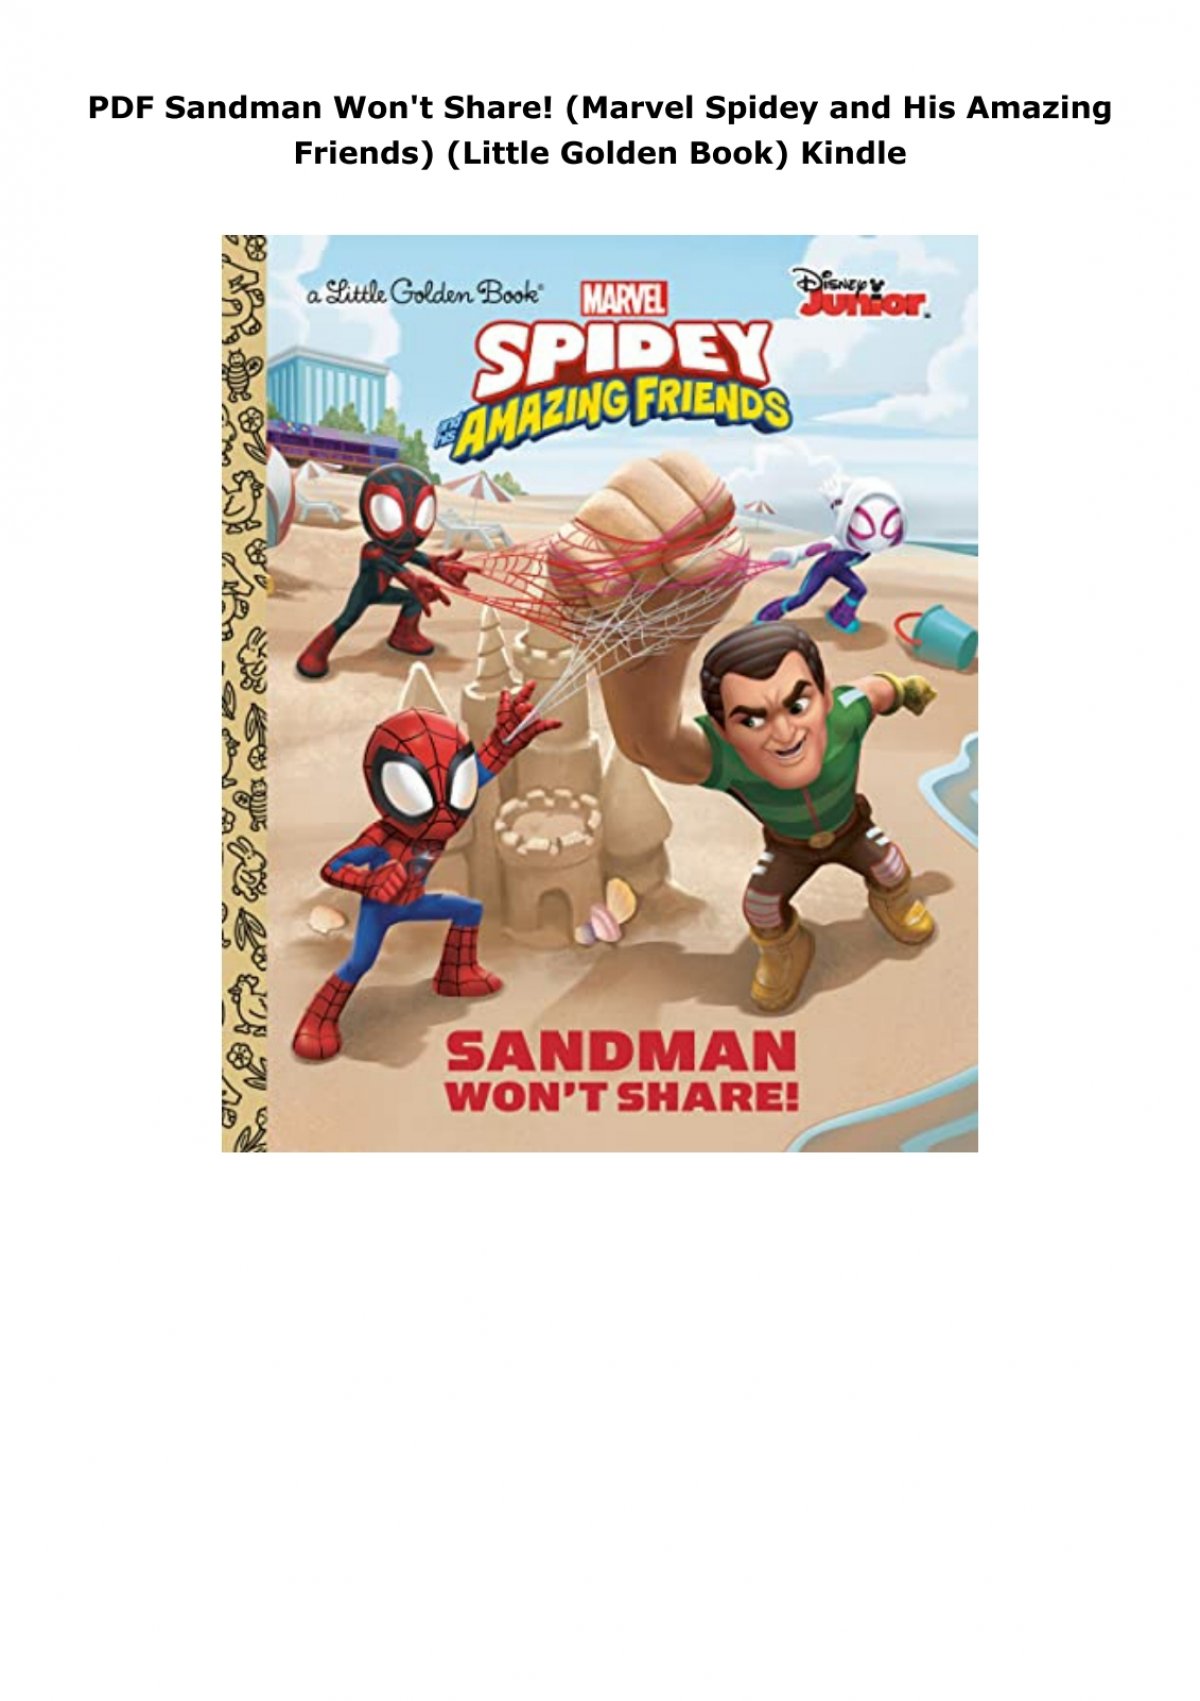 Sandman Won't Share! (Marvel Spidey and His Amazing Friends) by